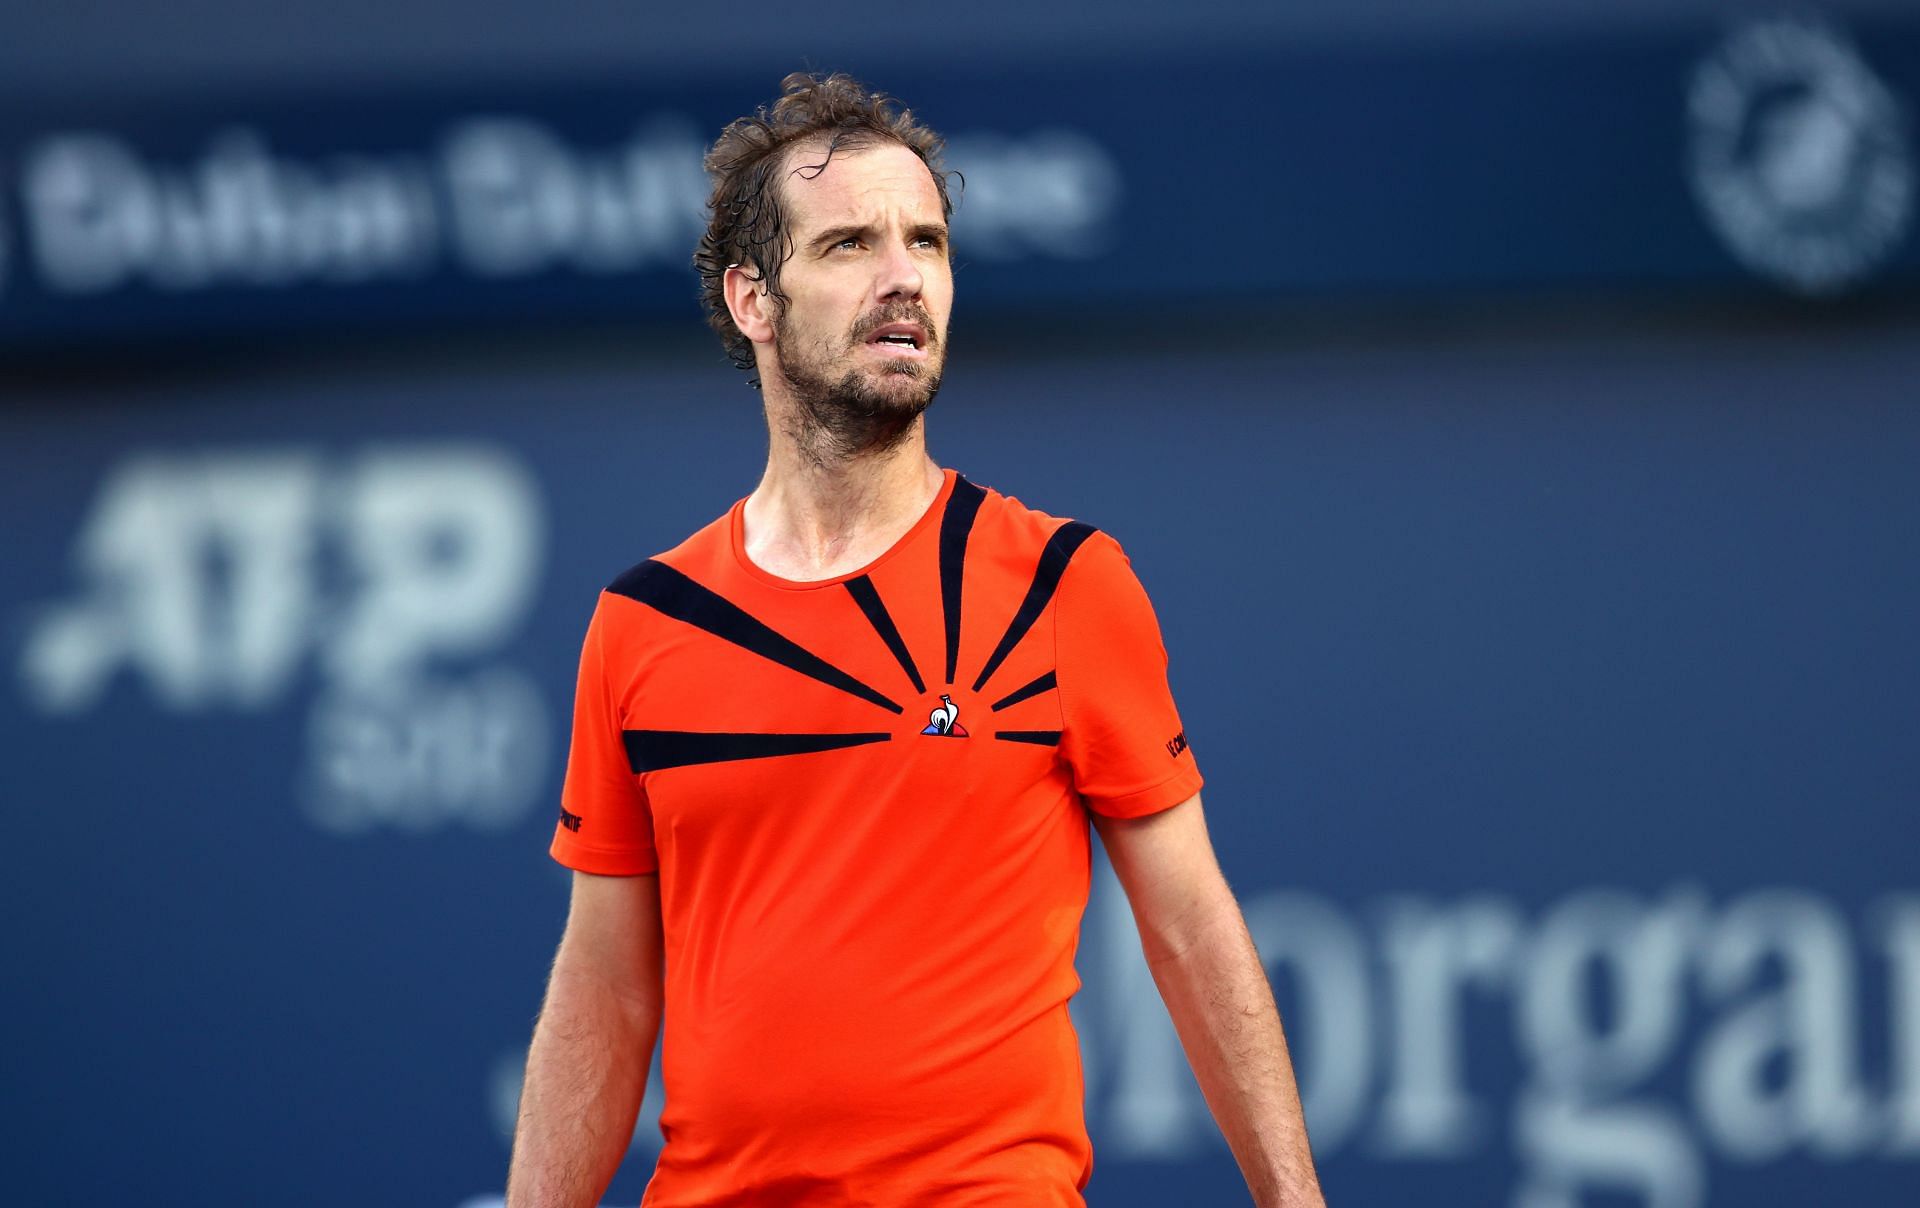 2 things that stood out in Richard Gasquet's 3R win over Brandon Nakashima at Winston-Salem Open 2023